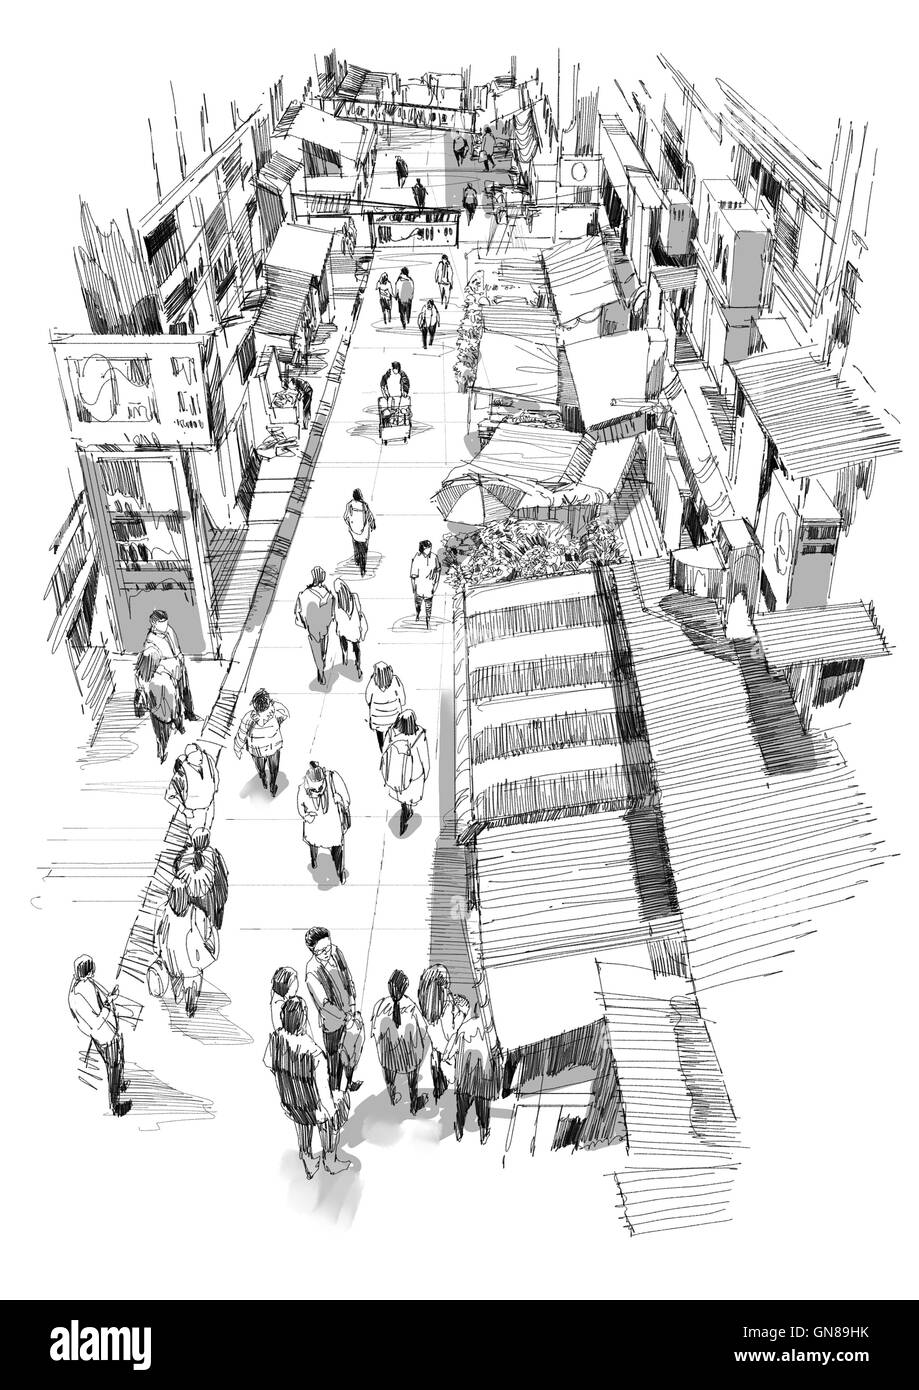 hand drawn sketch of people walking in market street,Illustration,drawing Stock Photo